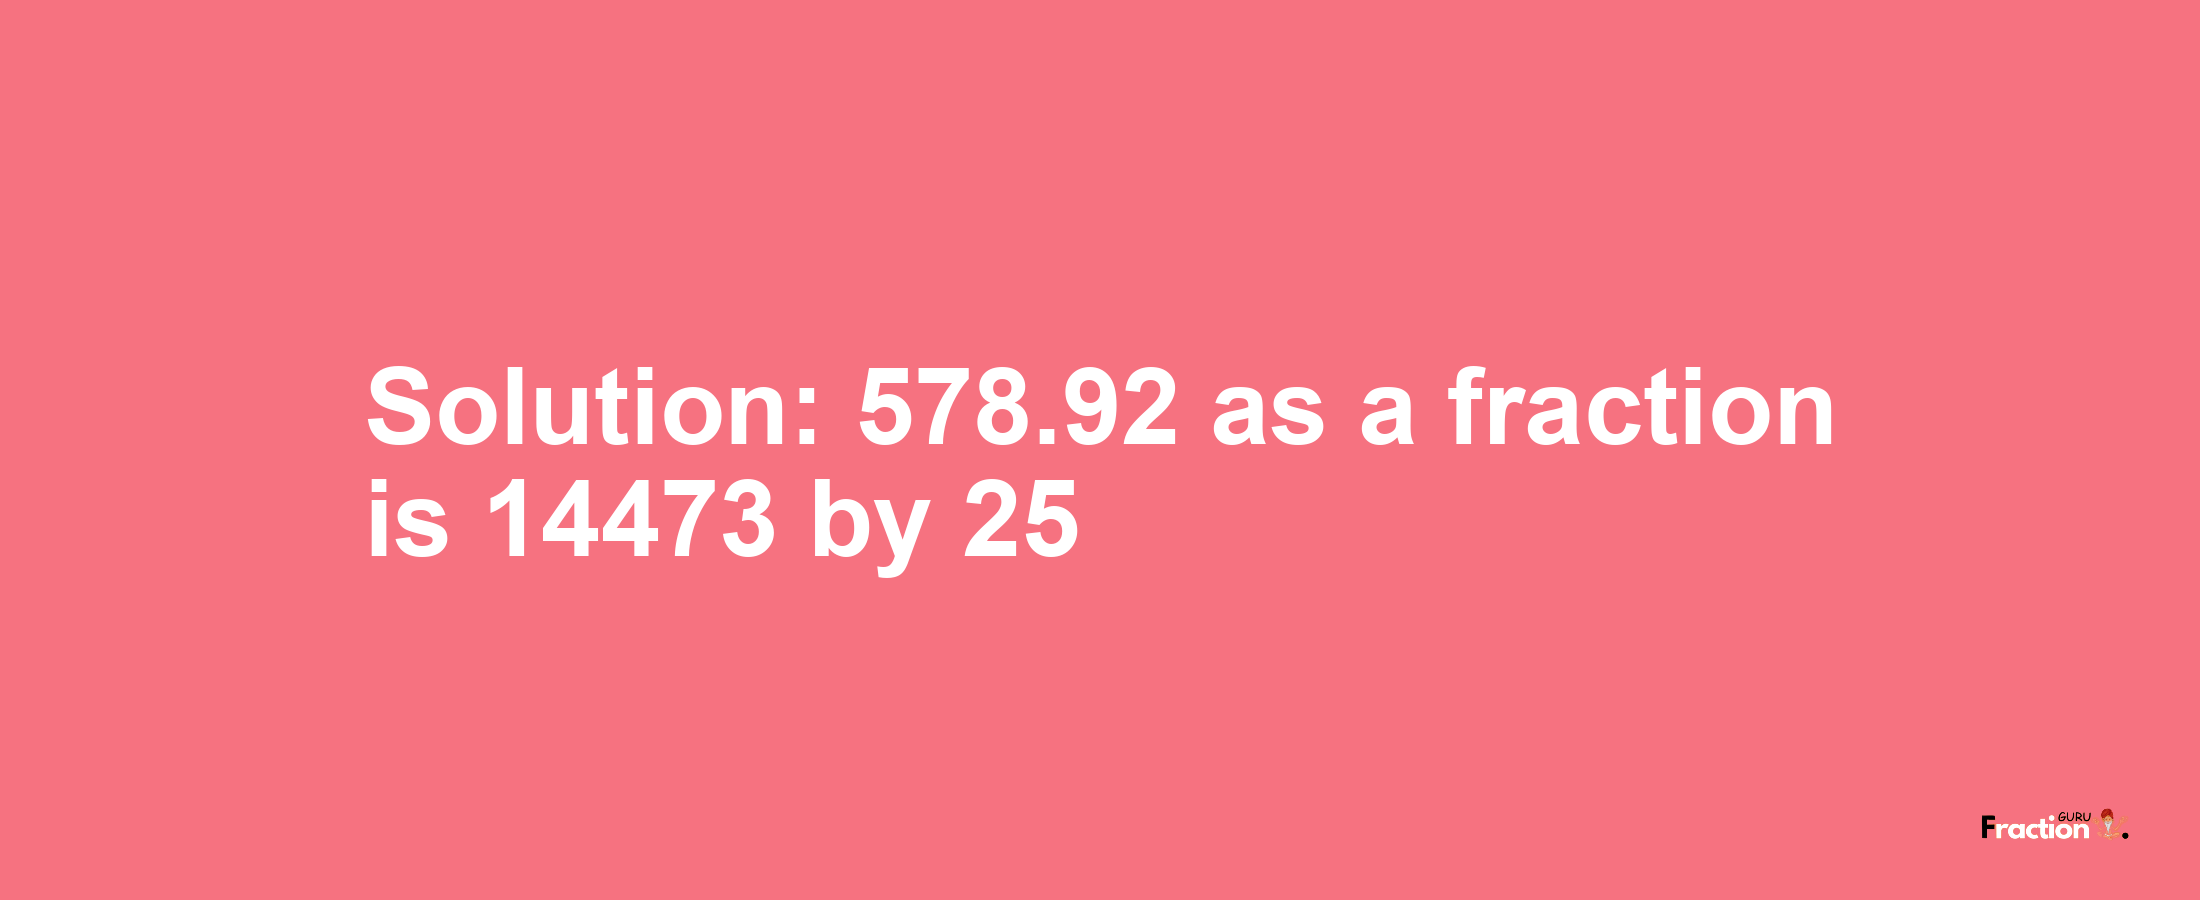 Solution:578.92 as a fraction is 14473/25